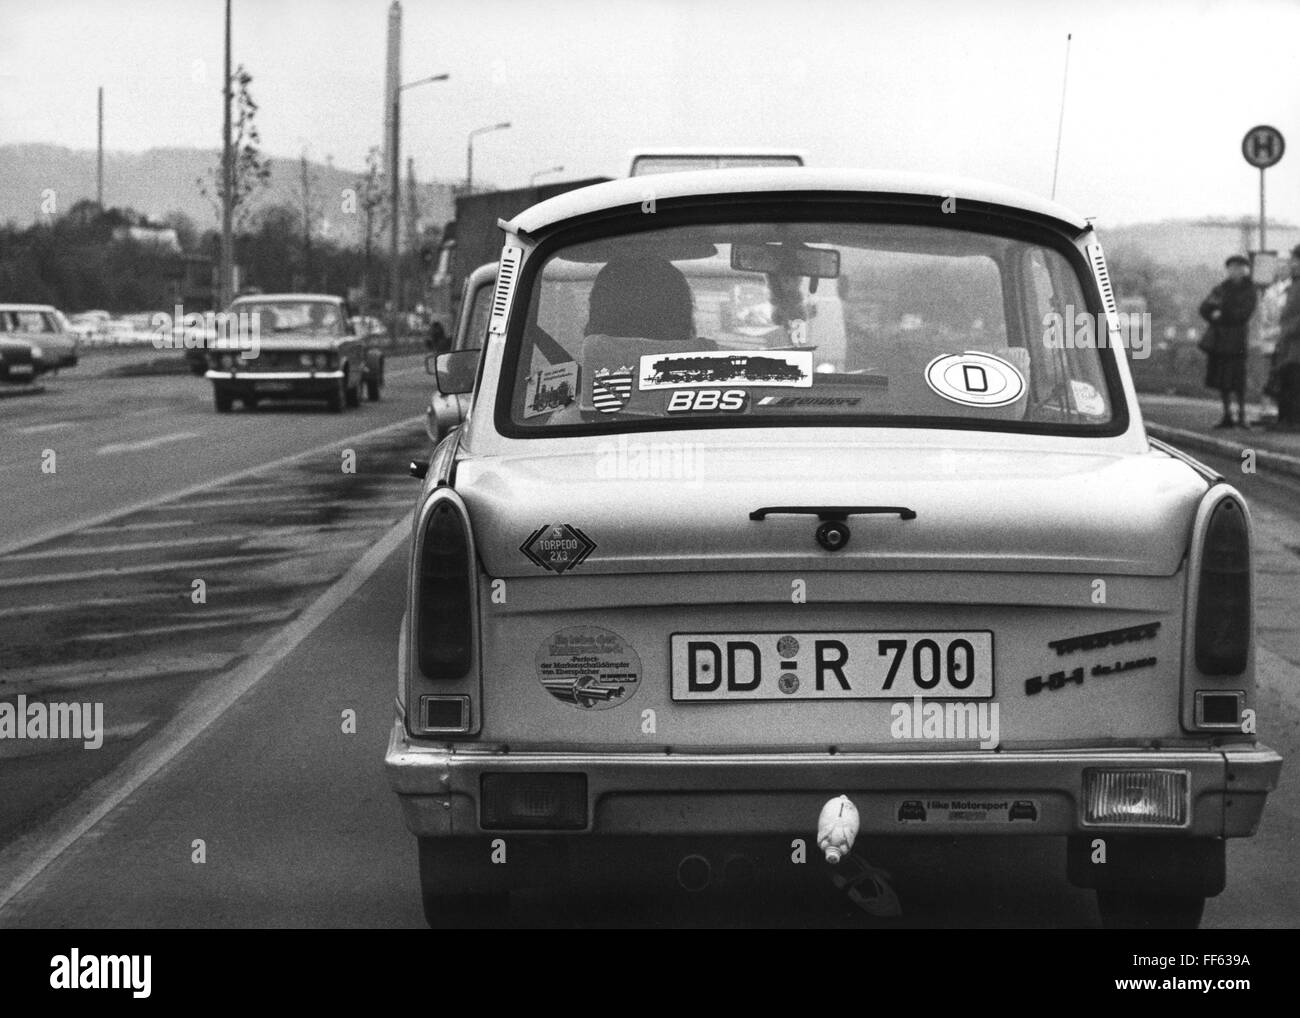 transport / transportation, car, vehicle variants, Sachsenring Trabant 601, in Dresden, December 1991, Trabbi, street, streets, vehicle, vehicles, motor car, auto, automobile, motorcar, motorcars, autos, automobiles, passenger cars, passenger coach, passenger car, Saxony, Germany, 1990s, 90s, 20th century, people, transport, transportation, car, cars, vehicle variants, vehicle variants, historic, historical, Additional-Rights-Clearences-Not Available Stock Photo